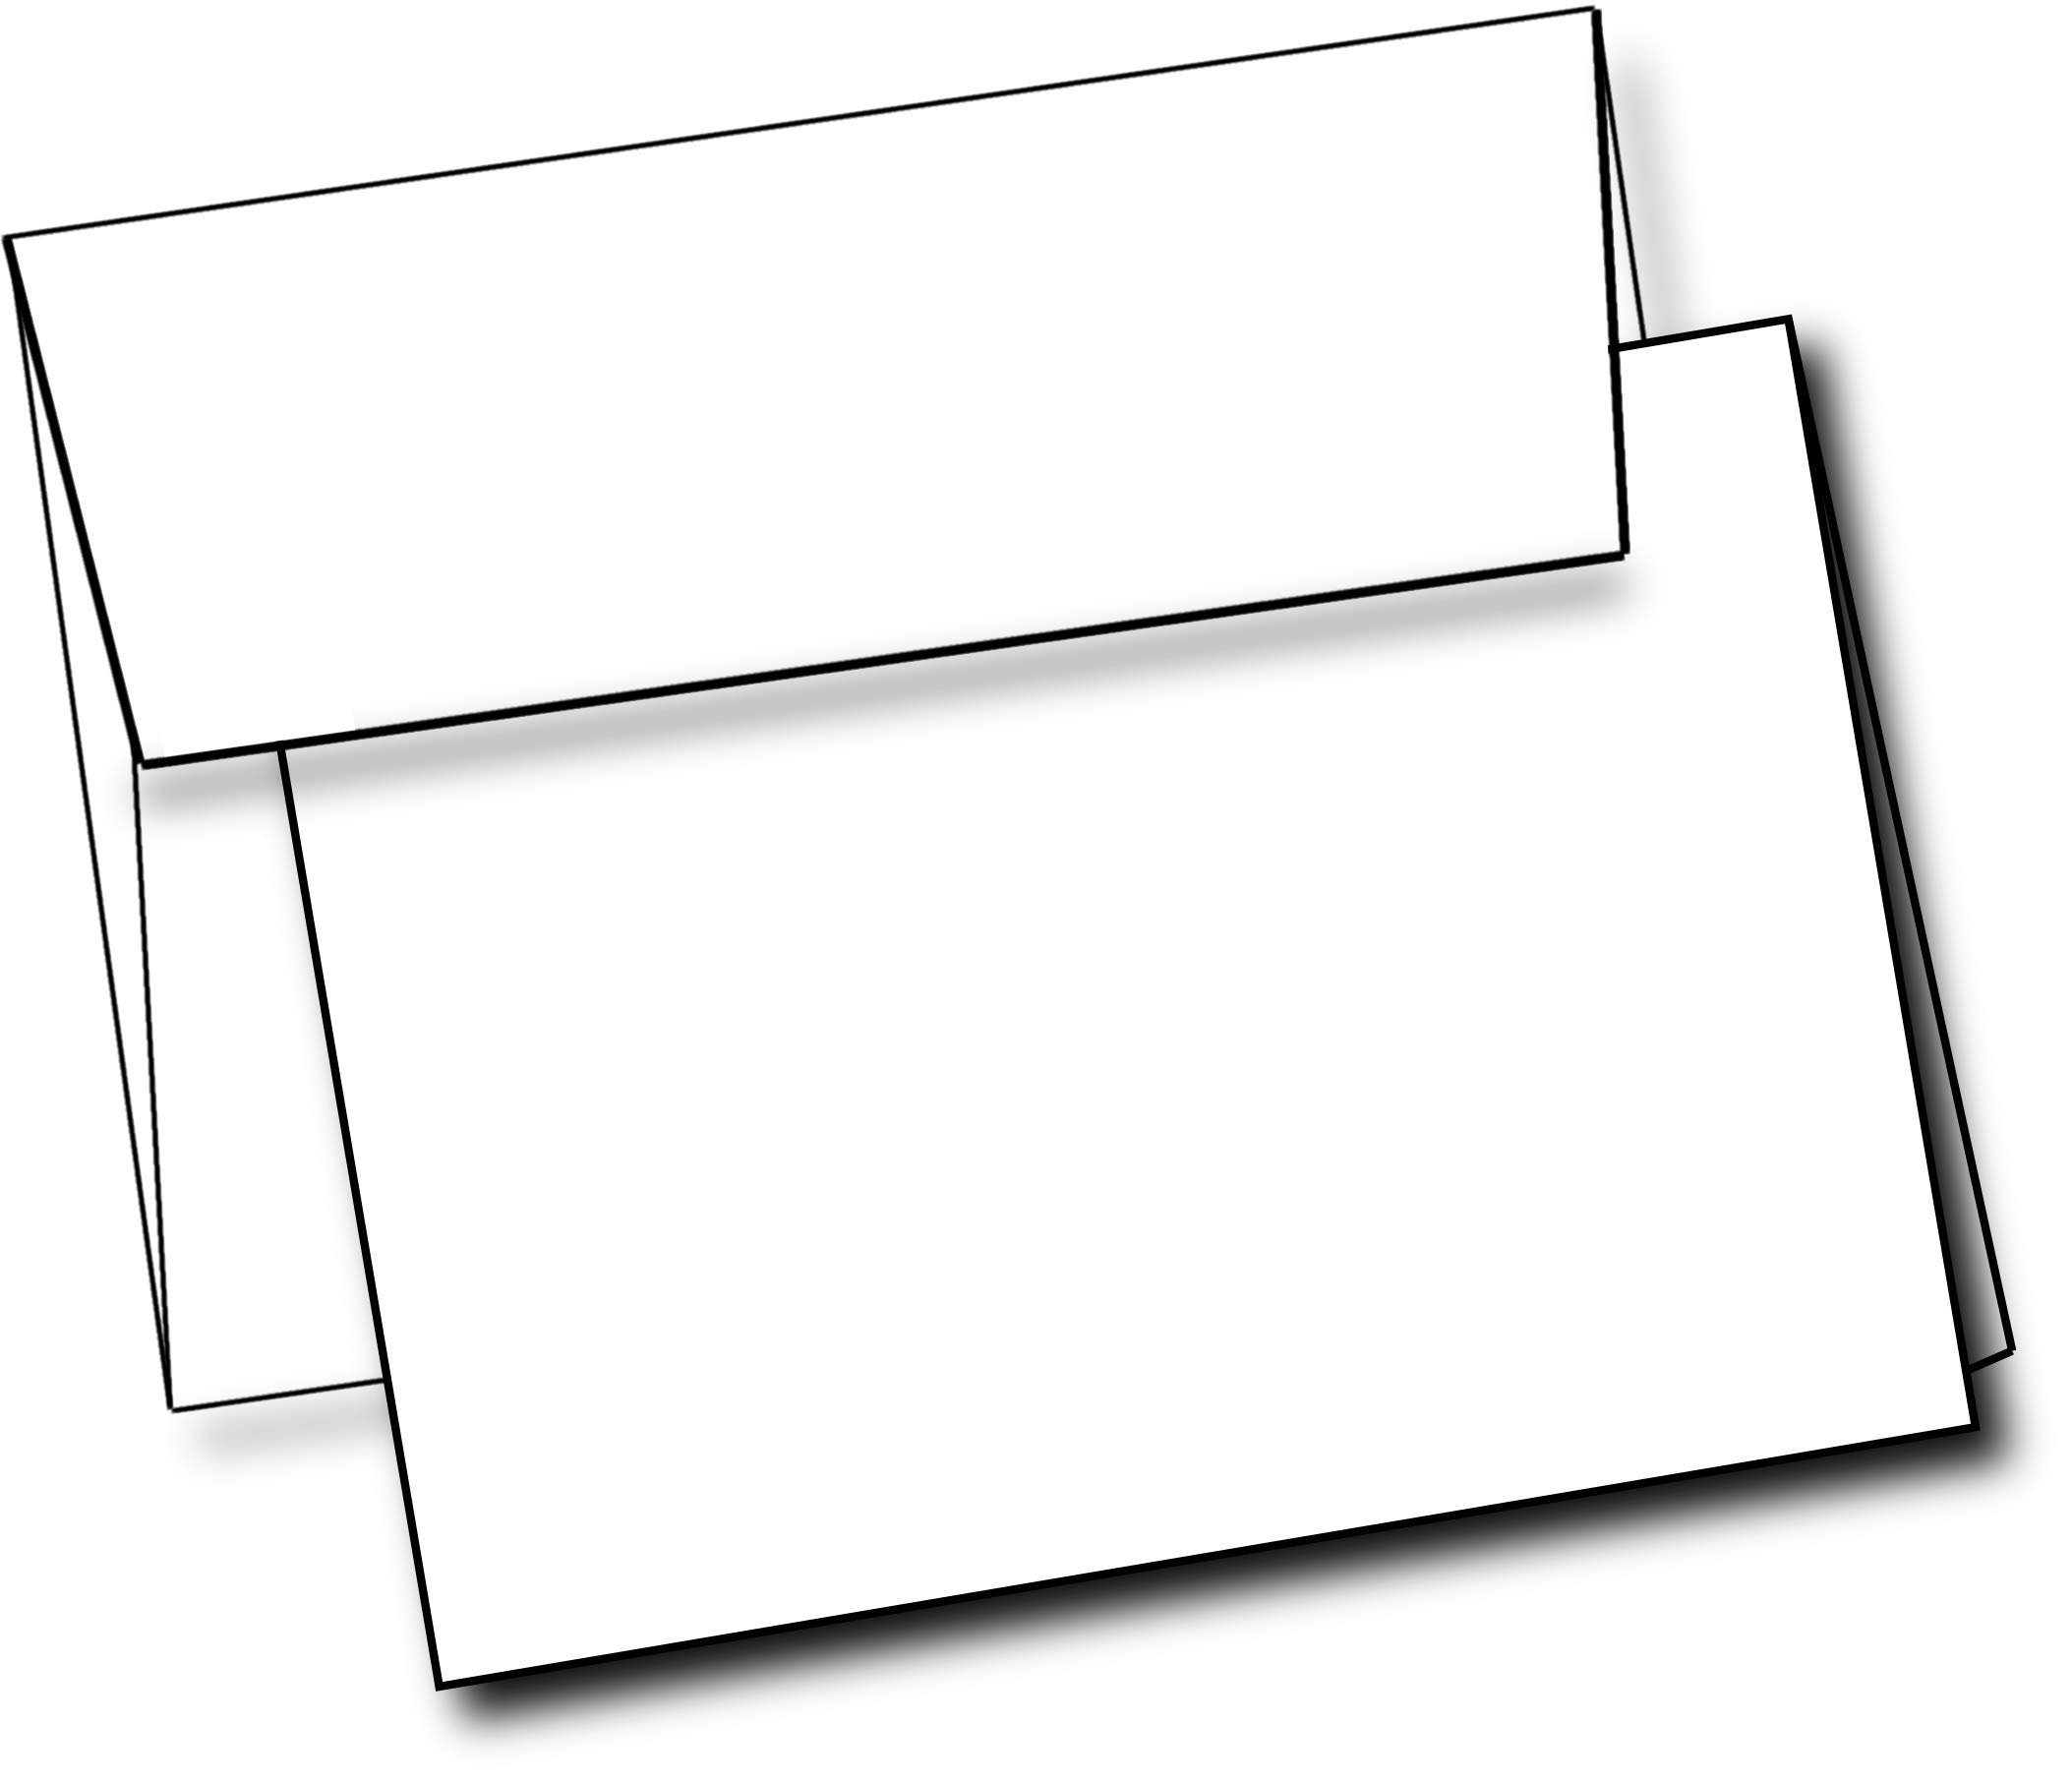 Purple Q Crafts Heavyweight White Blank Cards With White Envelopes 5